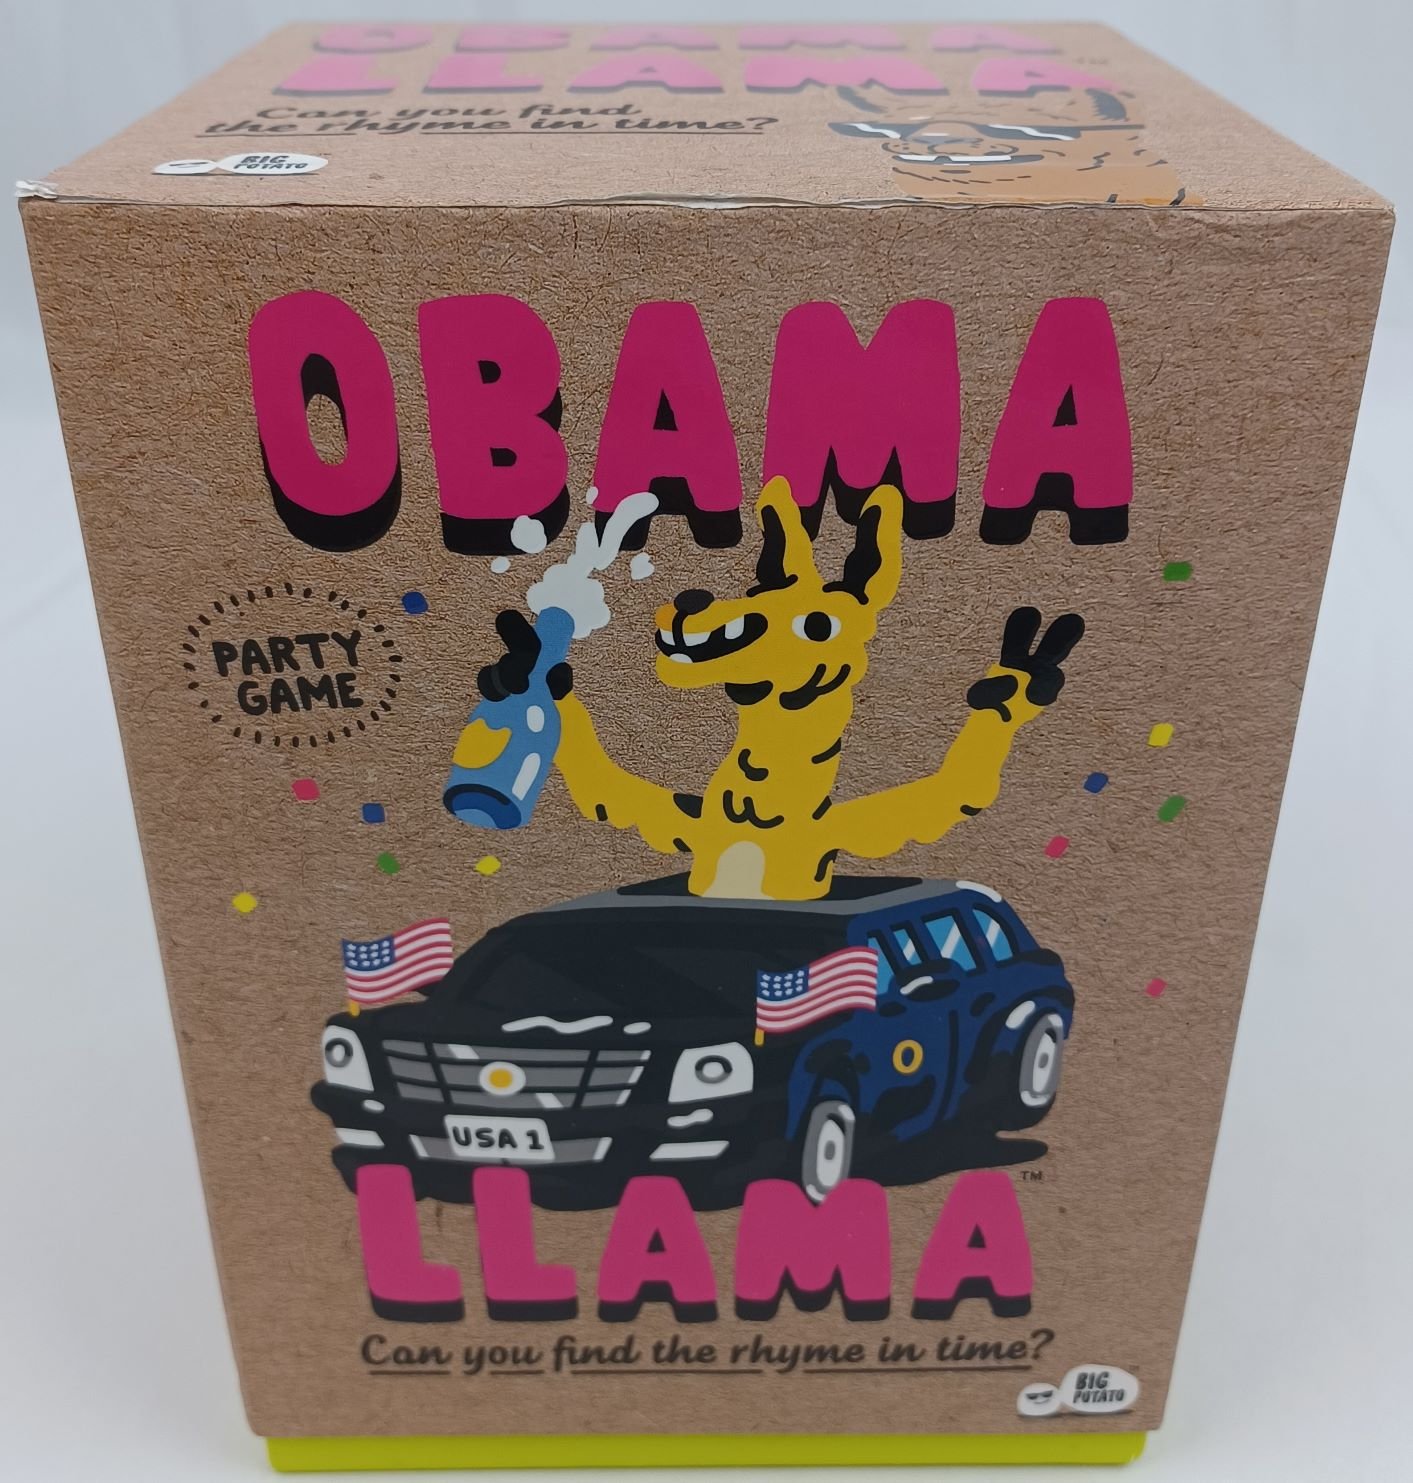 Obama Llama Board Game Review and Rules